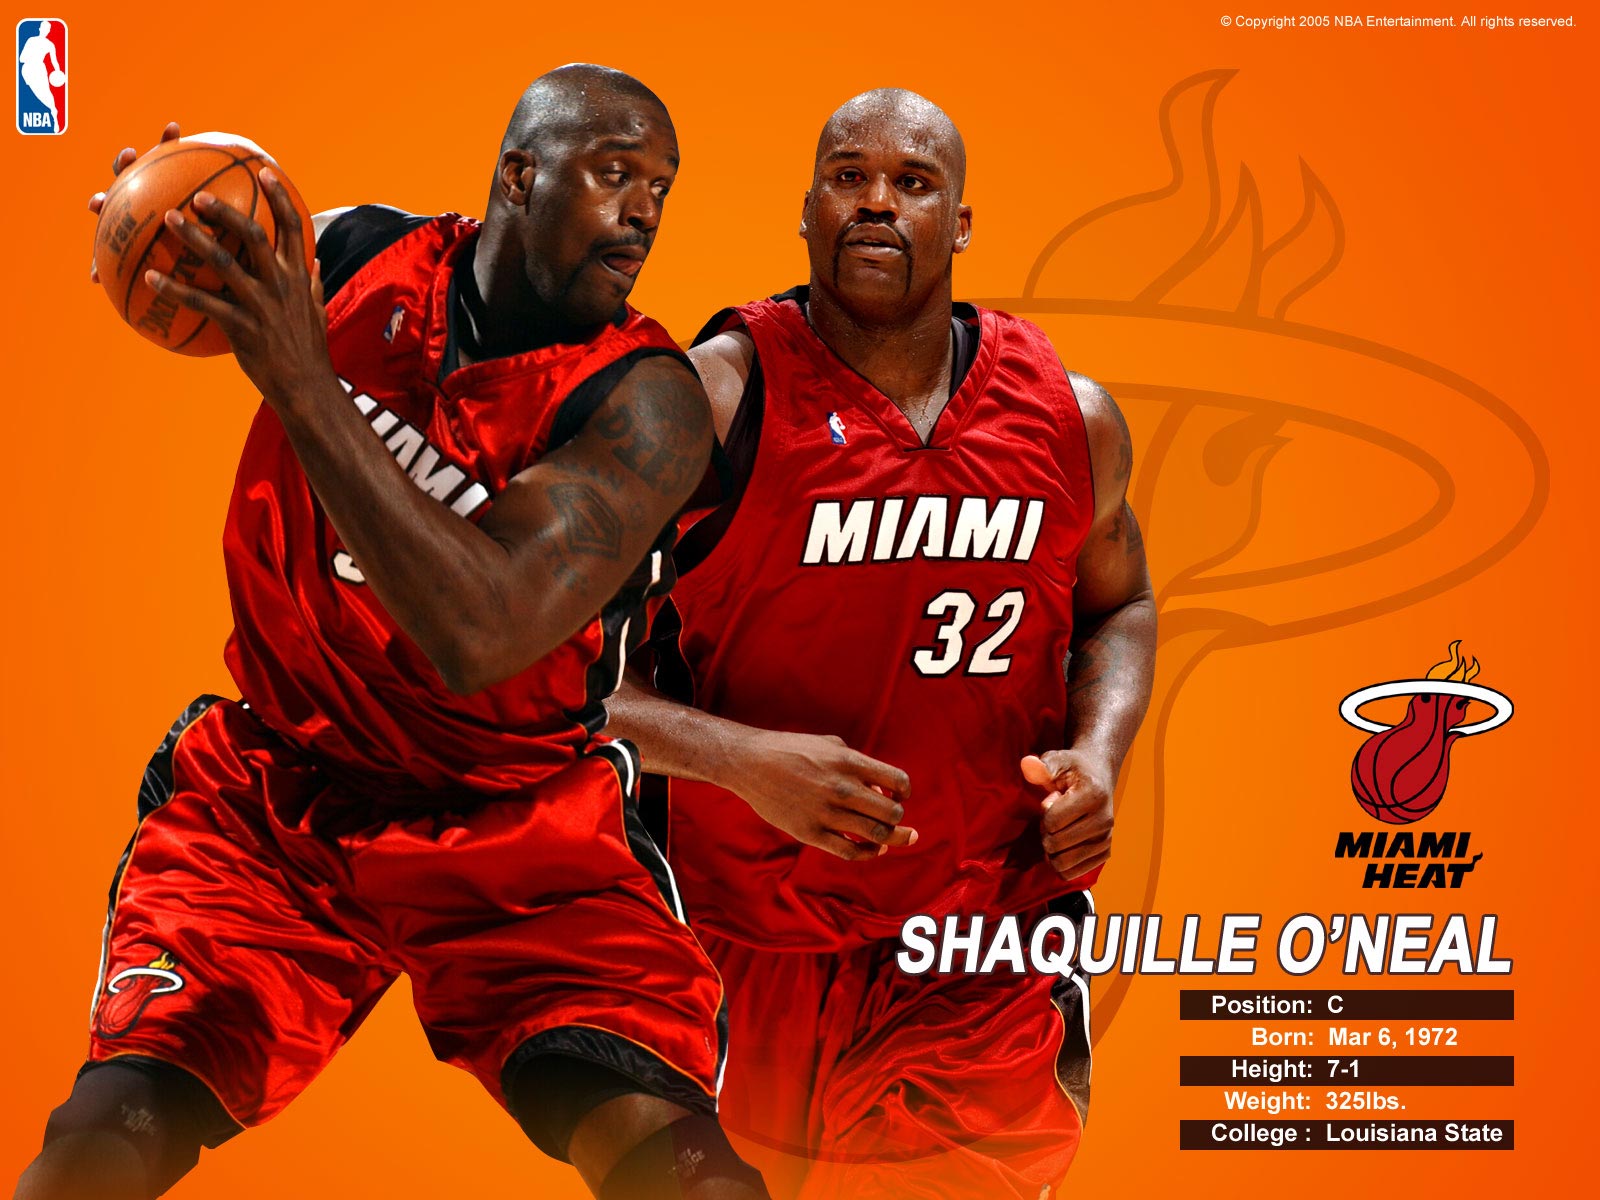 Here's cool wallpaper of Shaquille O' Neal, this time in dress of Miami Heat 